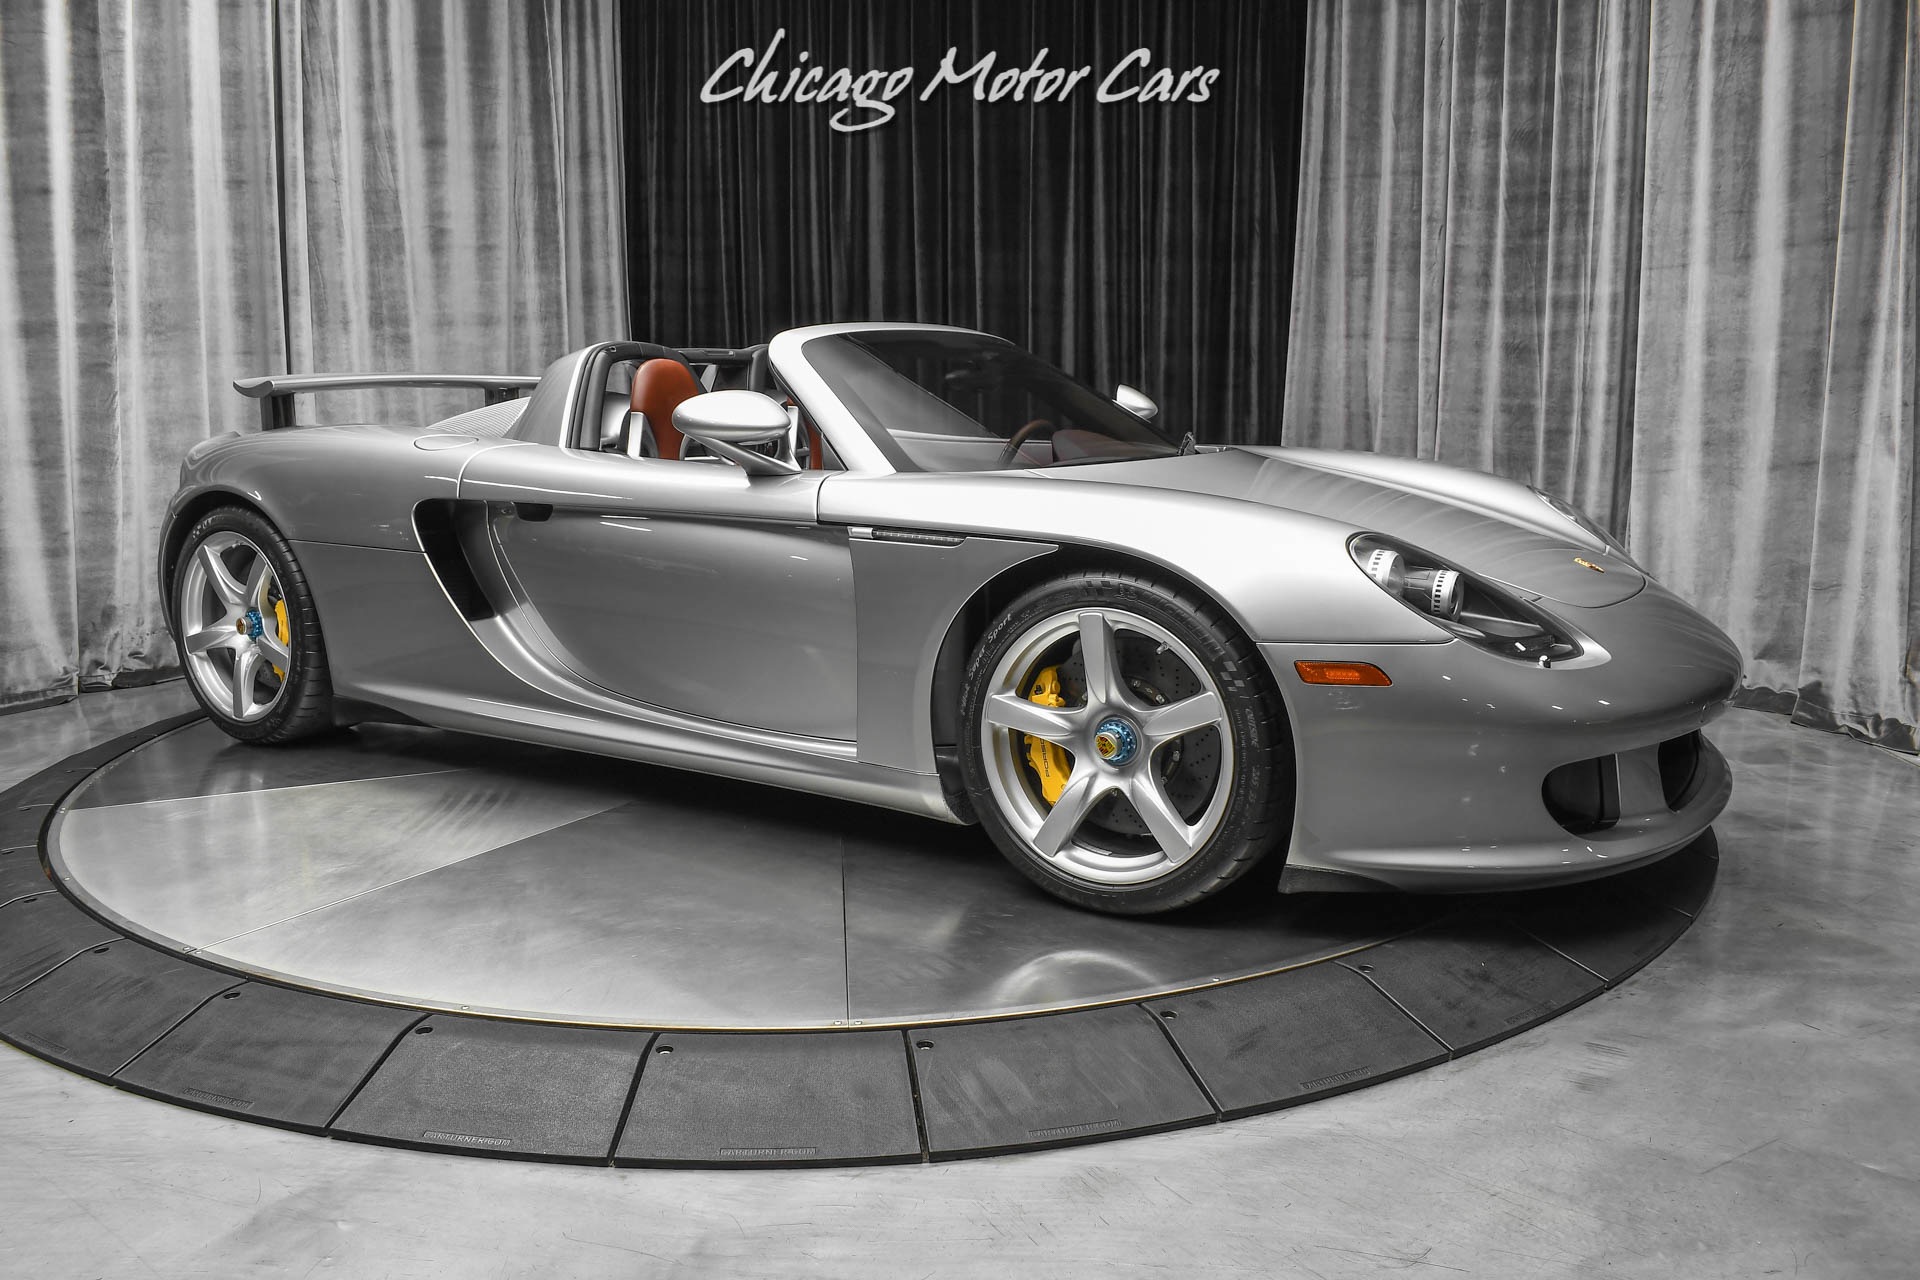 Used-2005-Porsche-Carrera-GT-Only-2k-Miles-Fully-Serviced-Complete-Luggage-Set-Collector-Quality